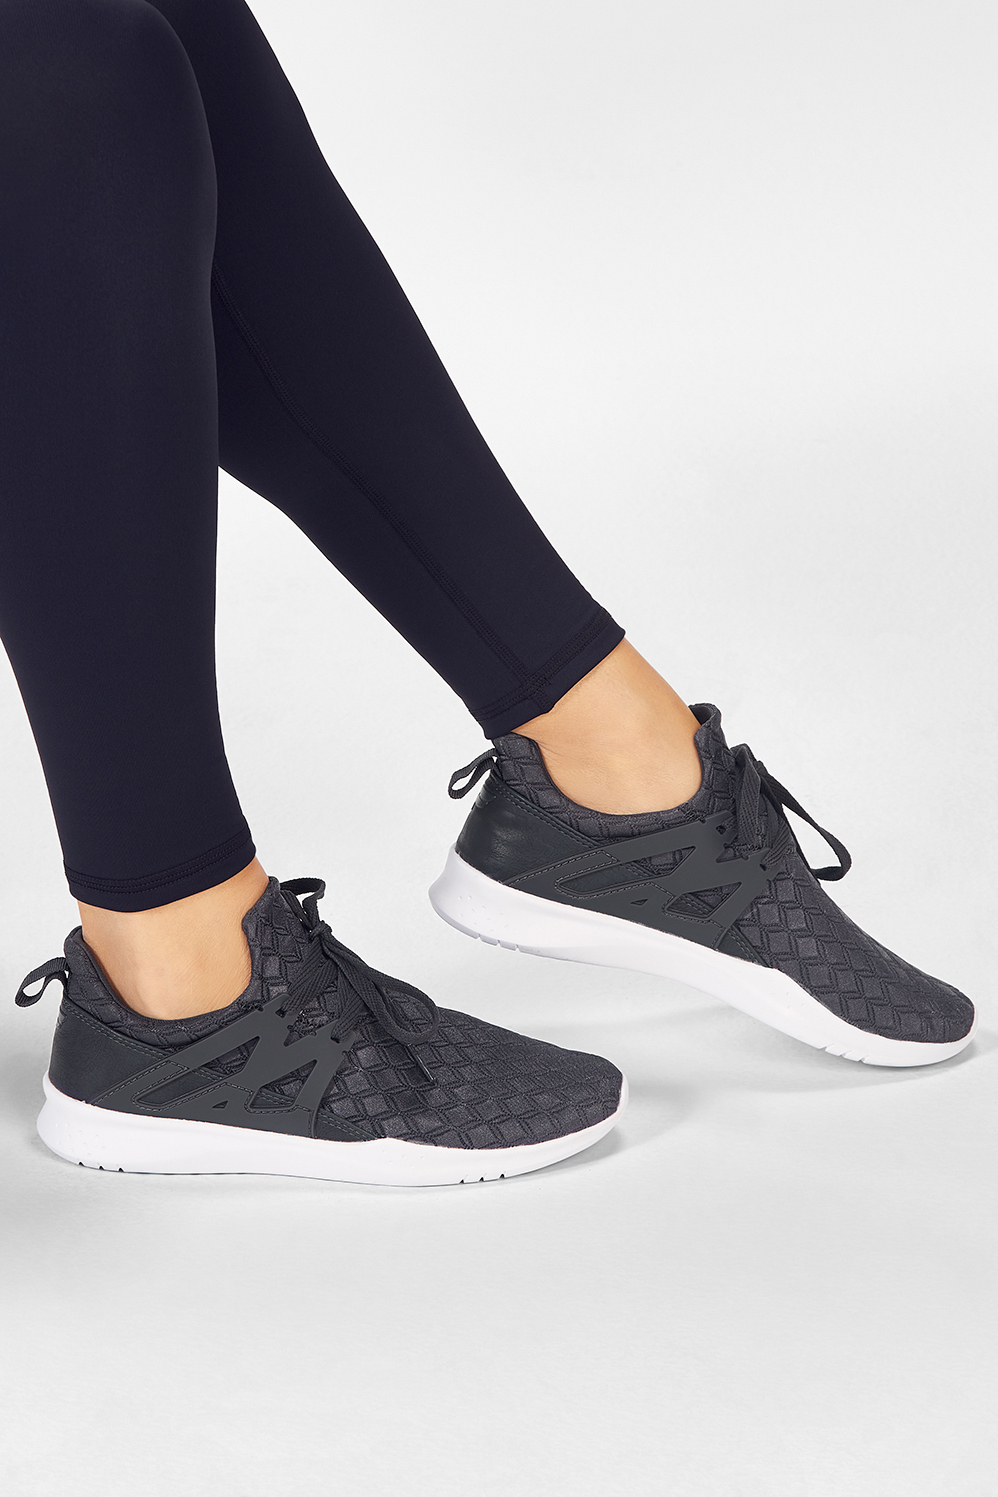 Quilted Indio Sneaker - Fabletics